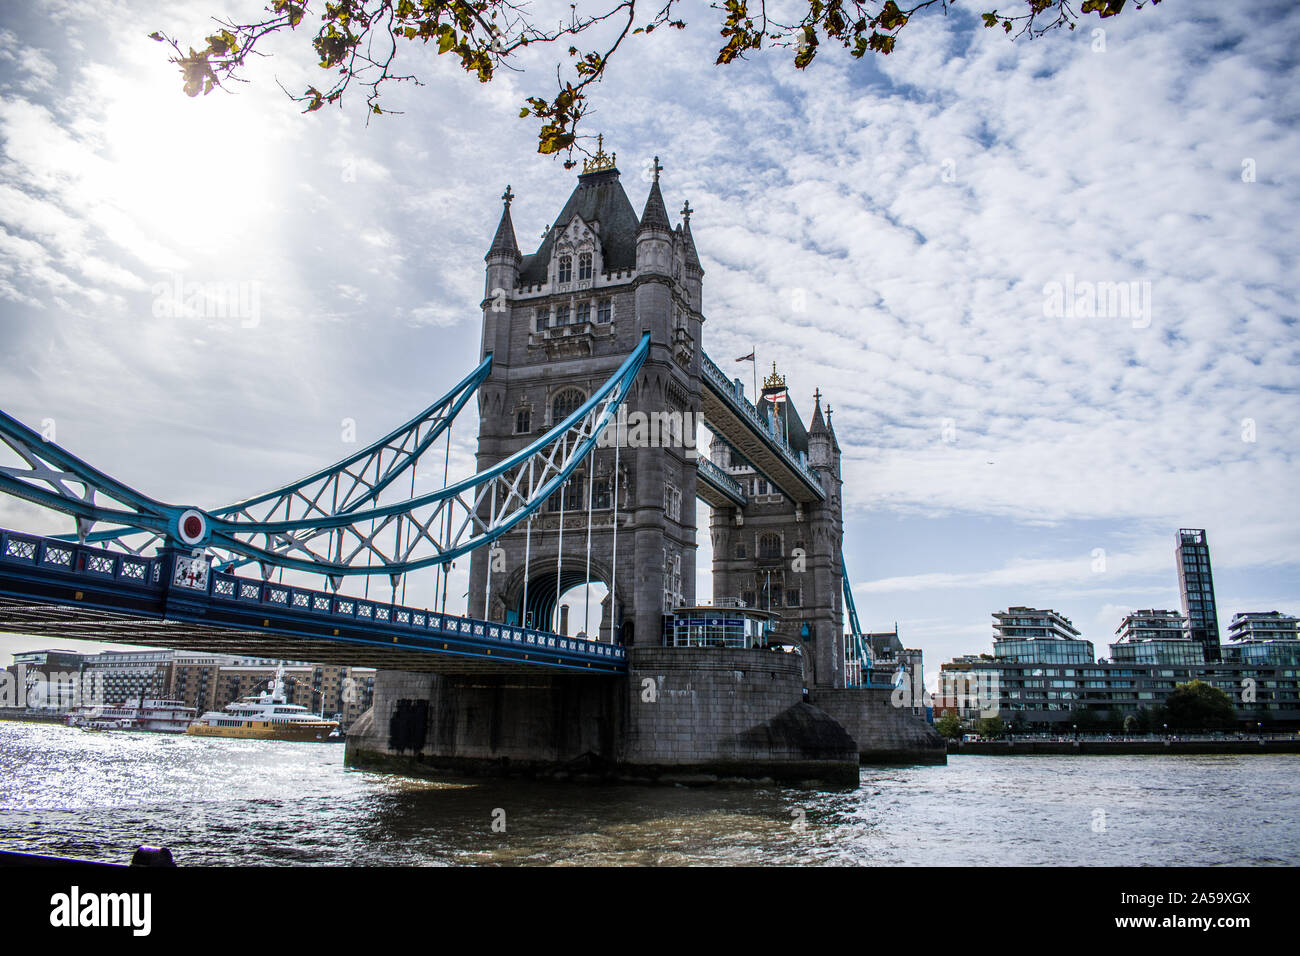 Tower Bridge in London across the River Tamesis by day Stock Photo